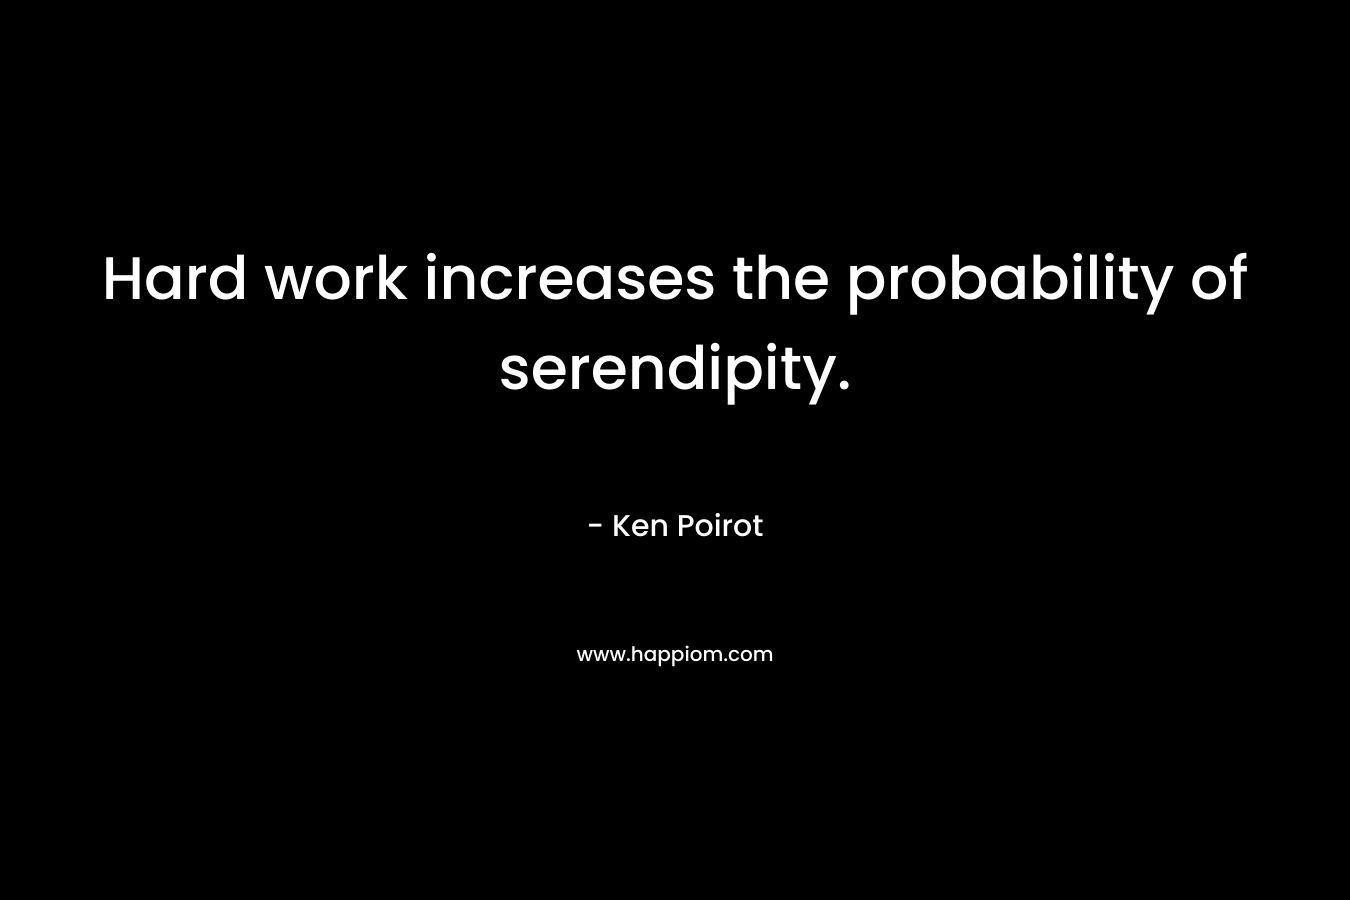 Hard work increases the probability of serendipity. – Ken Poirot